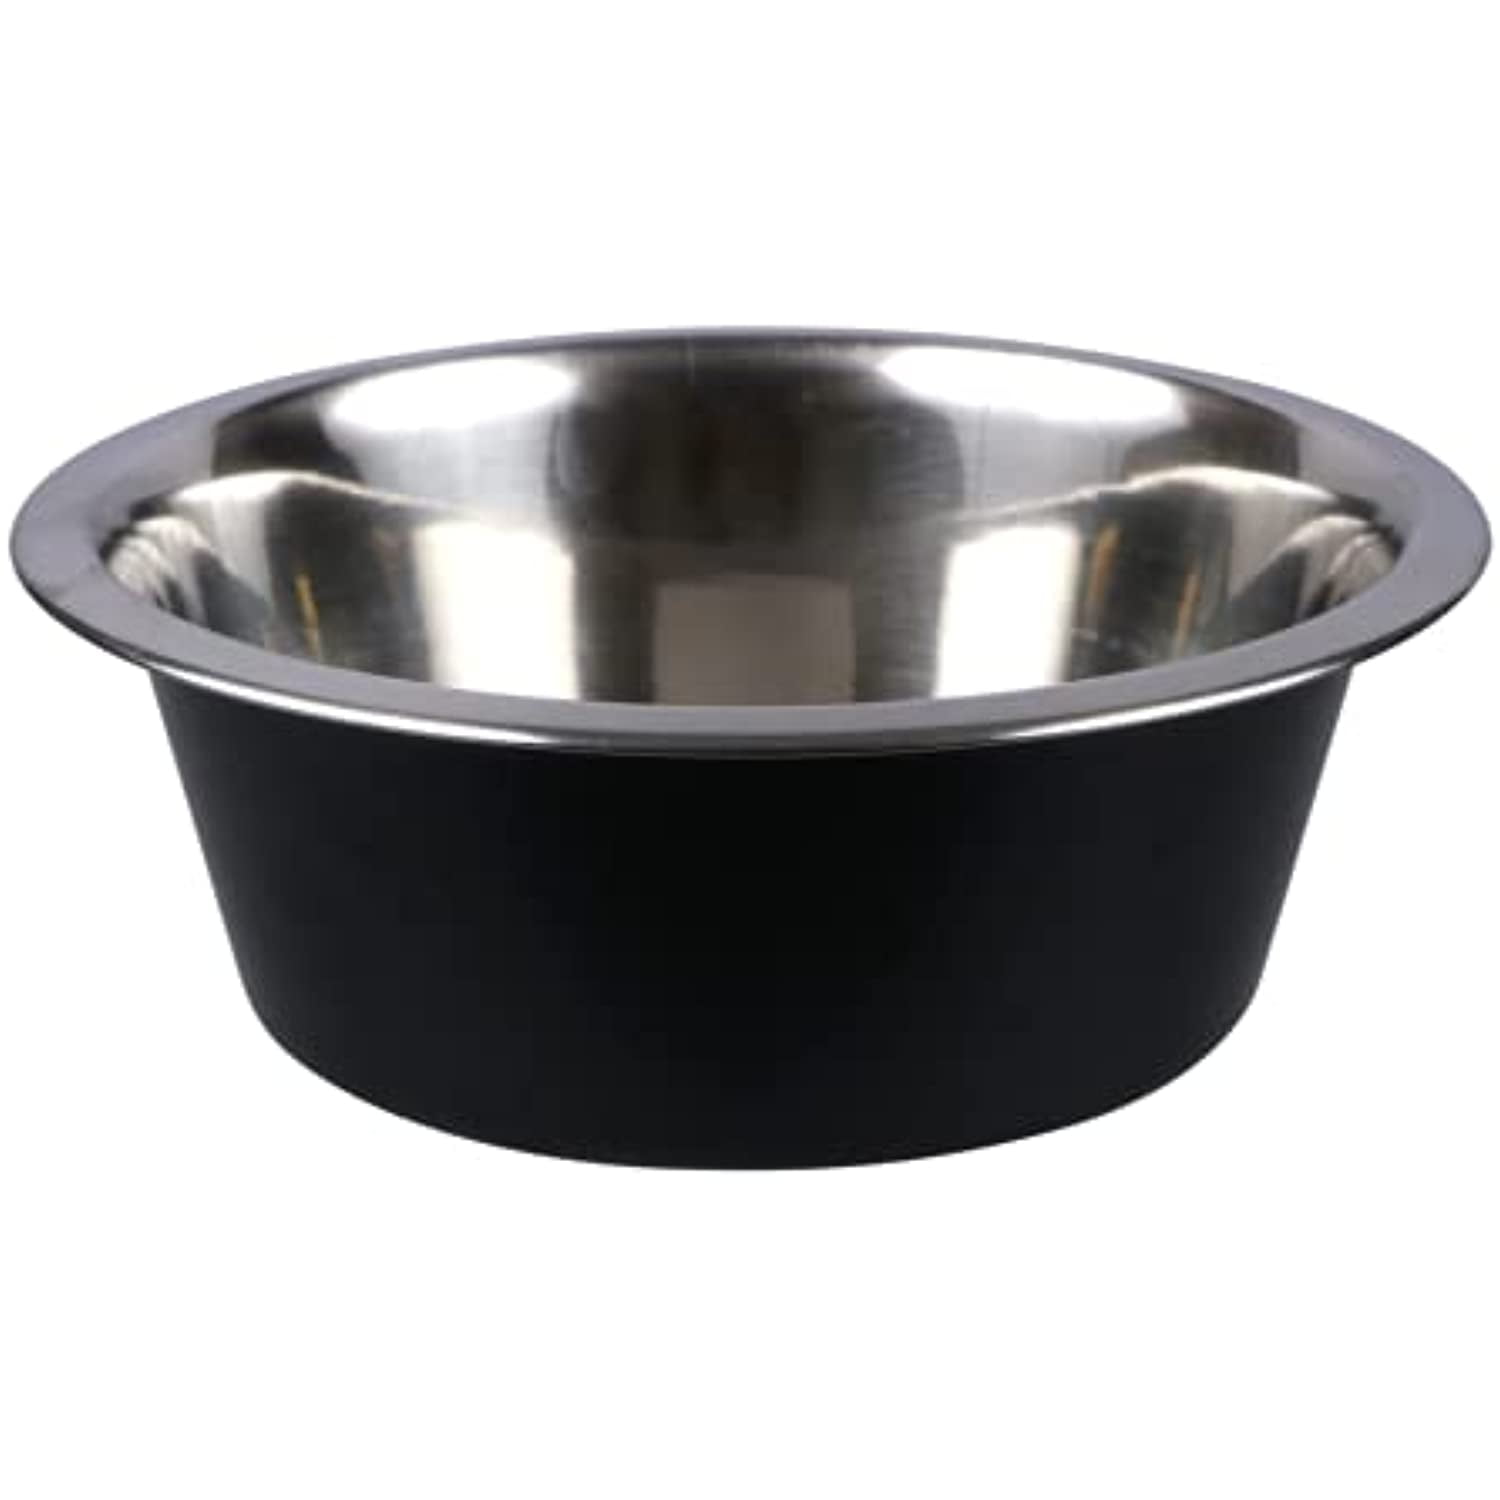 AveryDay Adjustable Elevated Dog Bowls- 4 Heights & 2 Stainless Steel Pet  Bowls – Your AveryDay®